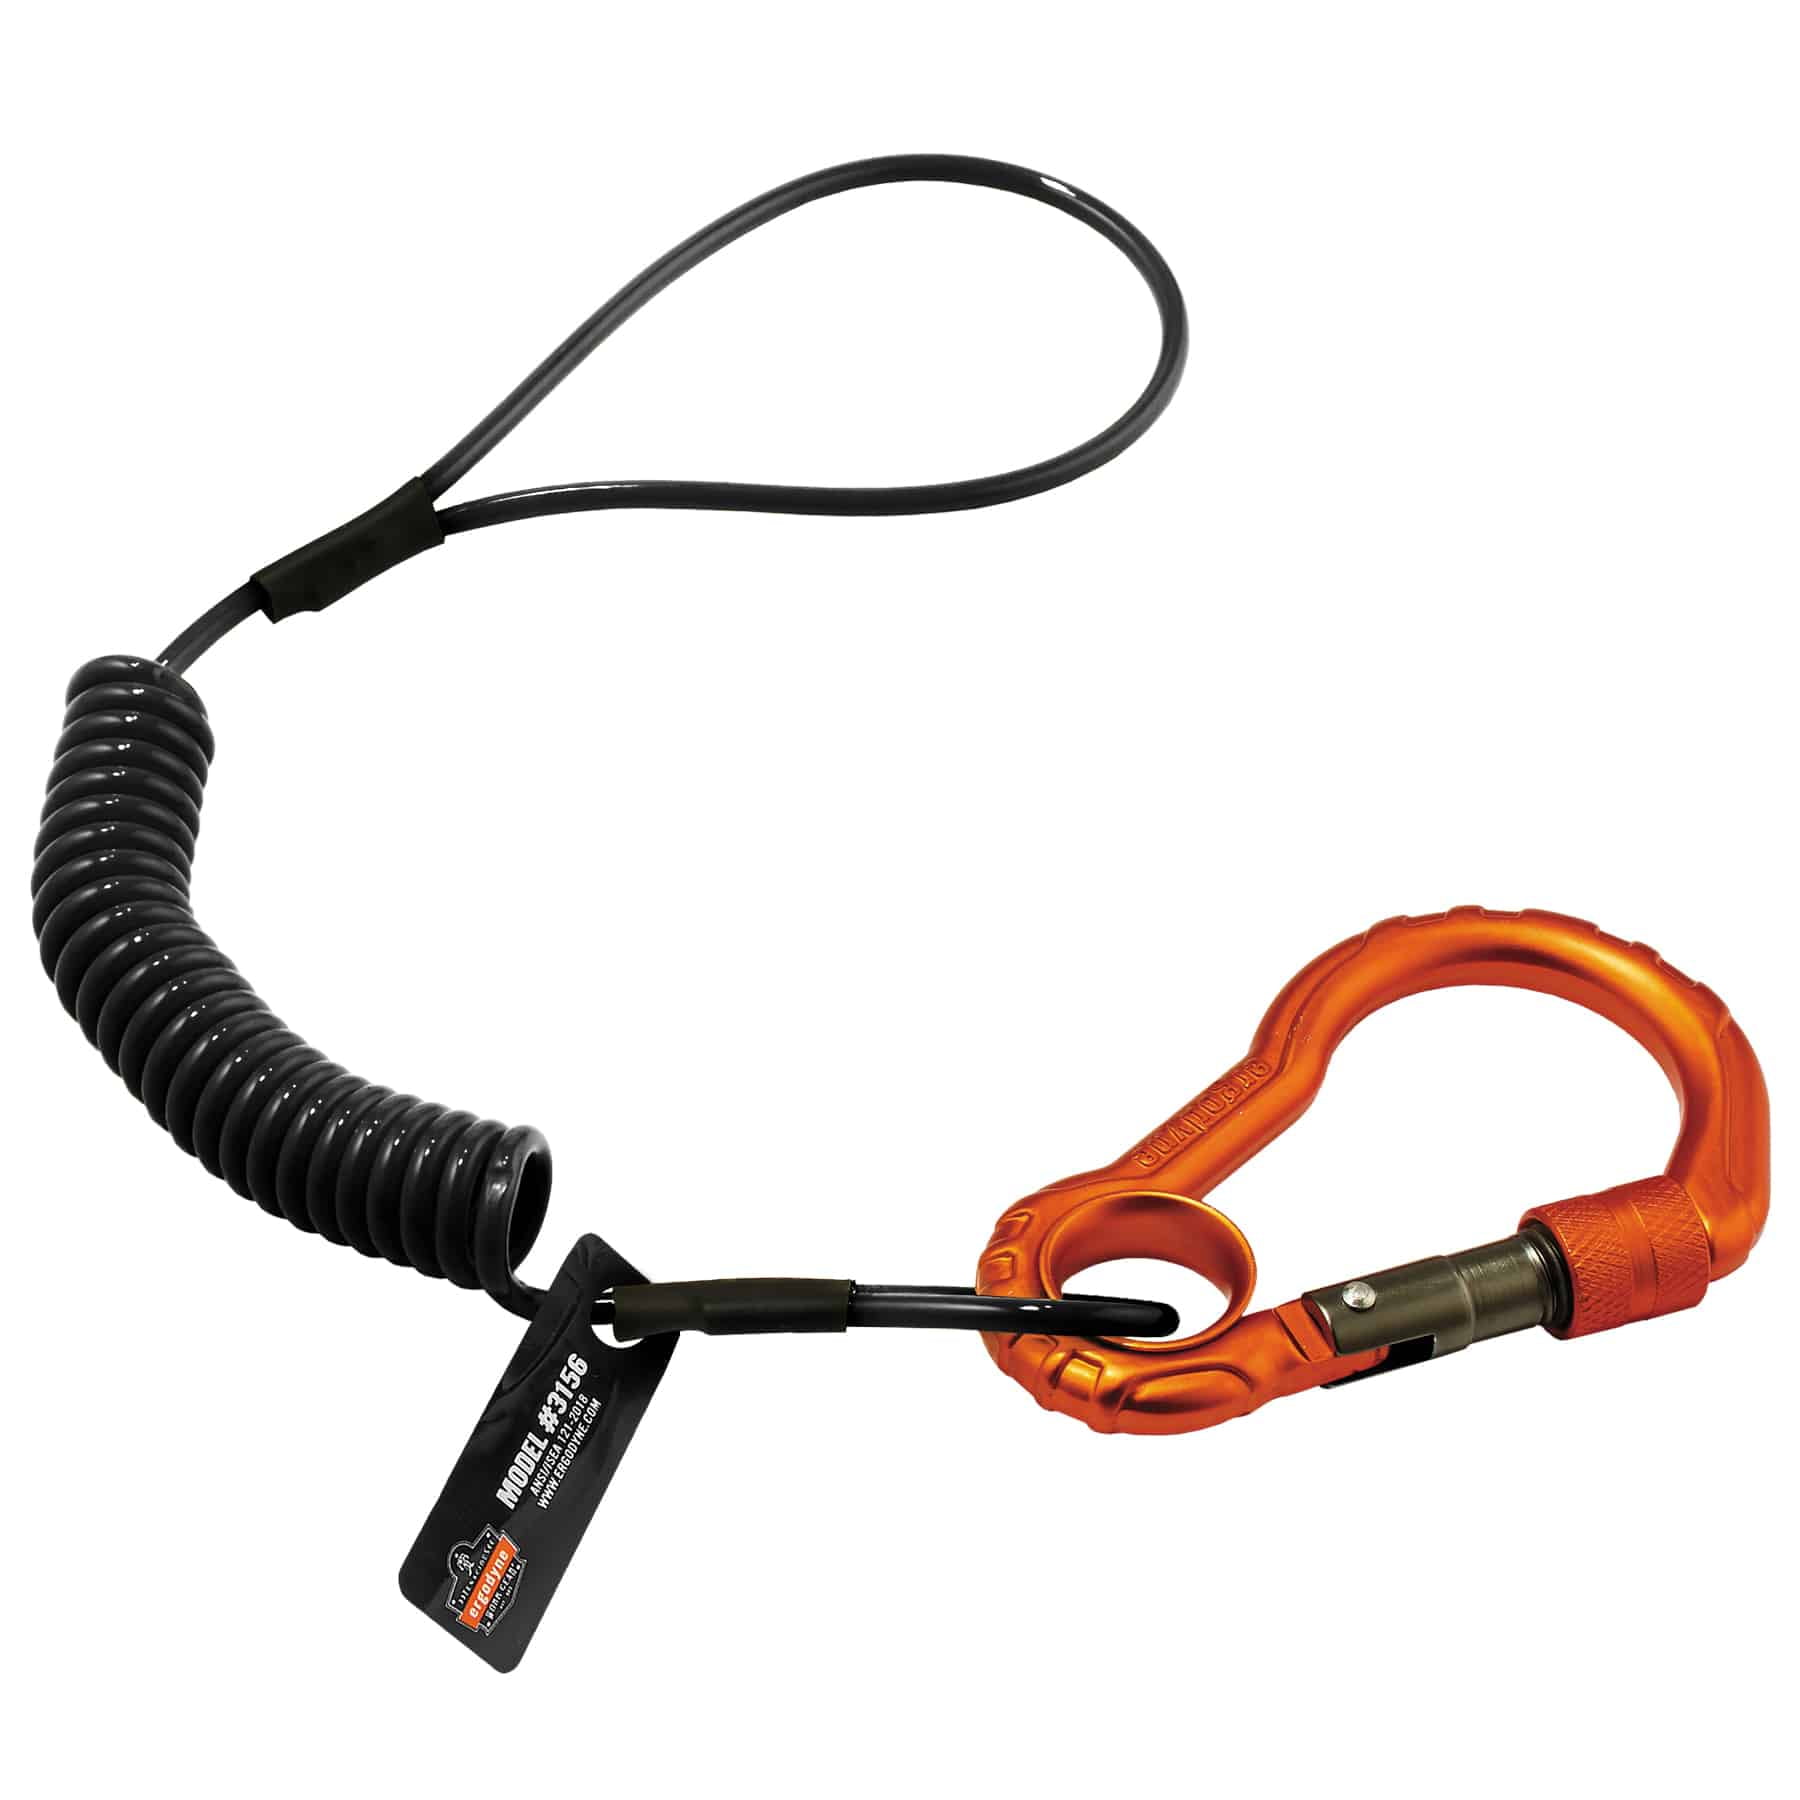 Tool Lanyard with Mini Carabiner, Accessory, Fall Protection